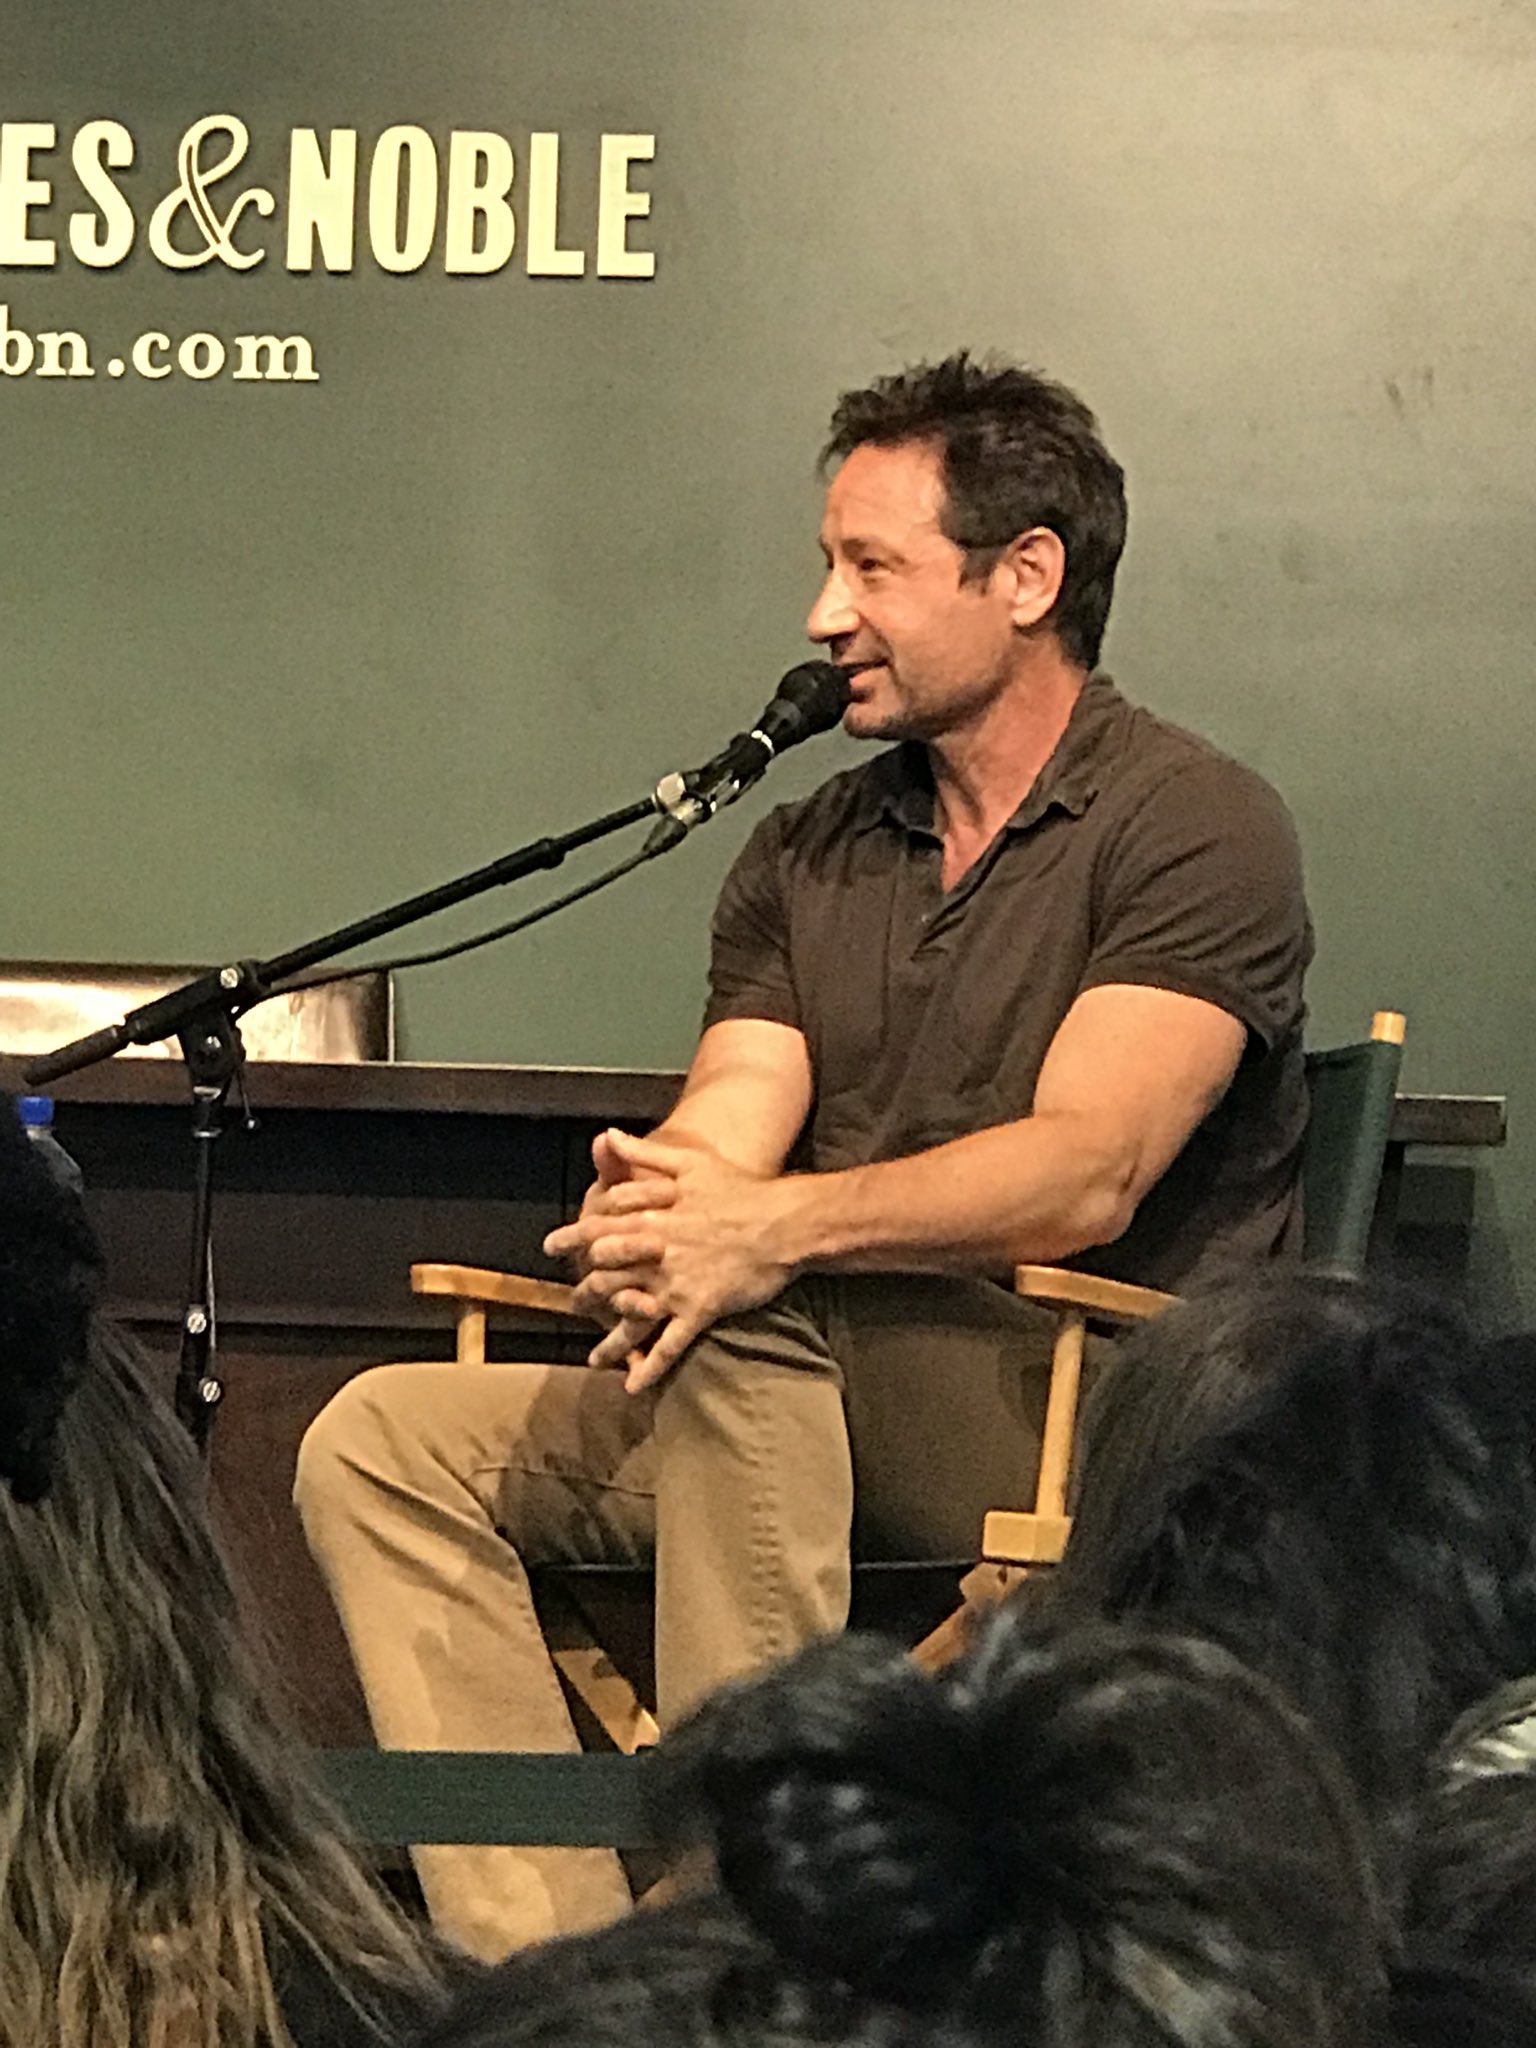 2018/05/01 - David at Barnes and Noble Union Square for Miss Subways DcKE9d-X4AAEcdc